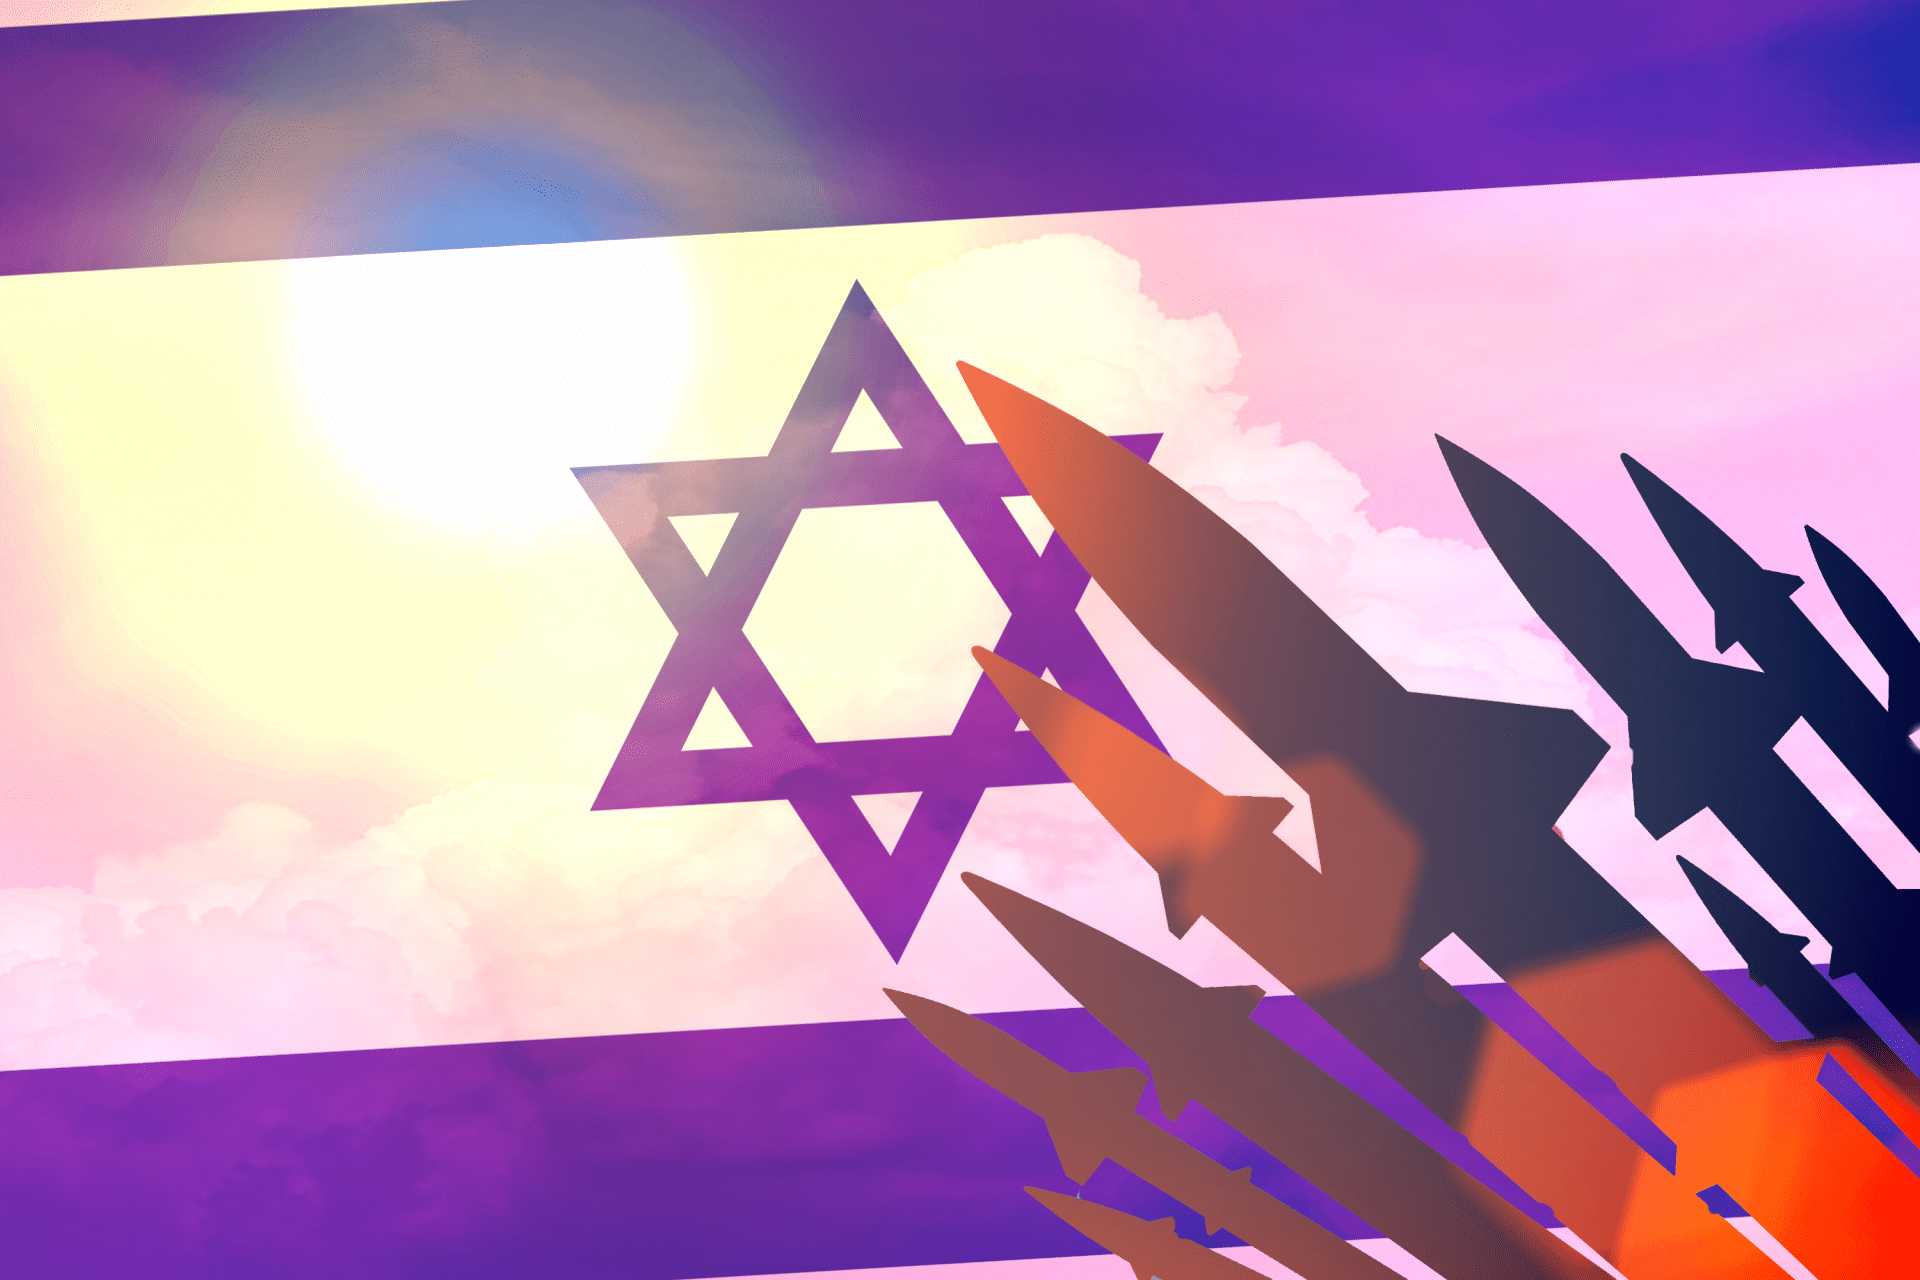 https://thebulletin.org/wp-content/uploads/2022/01/israel-flag-missiles-150x150.png